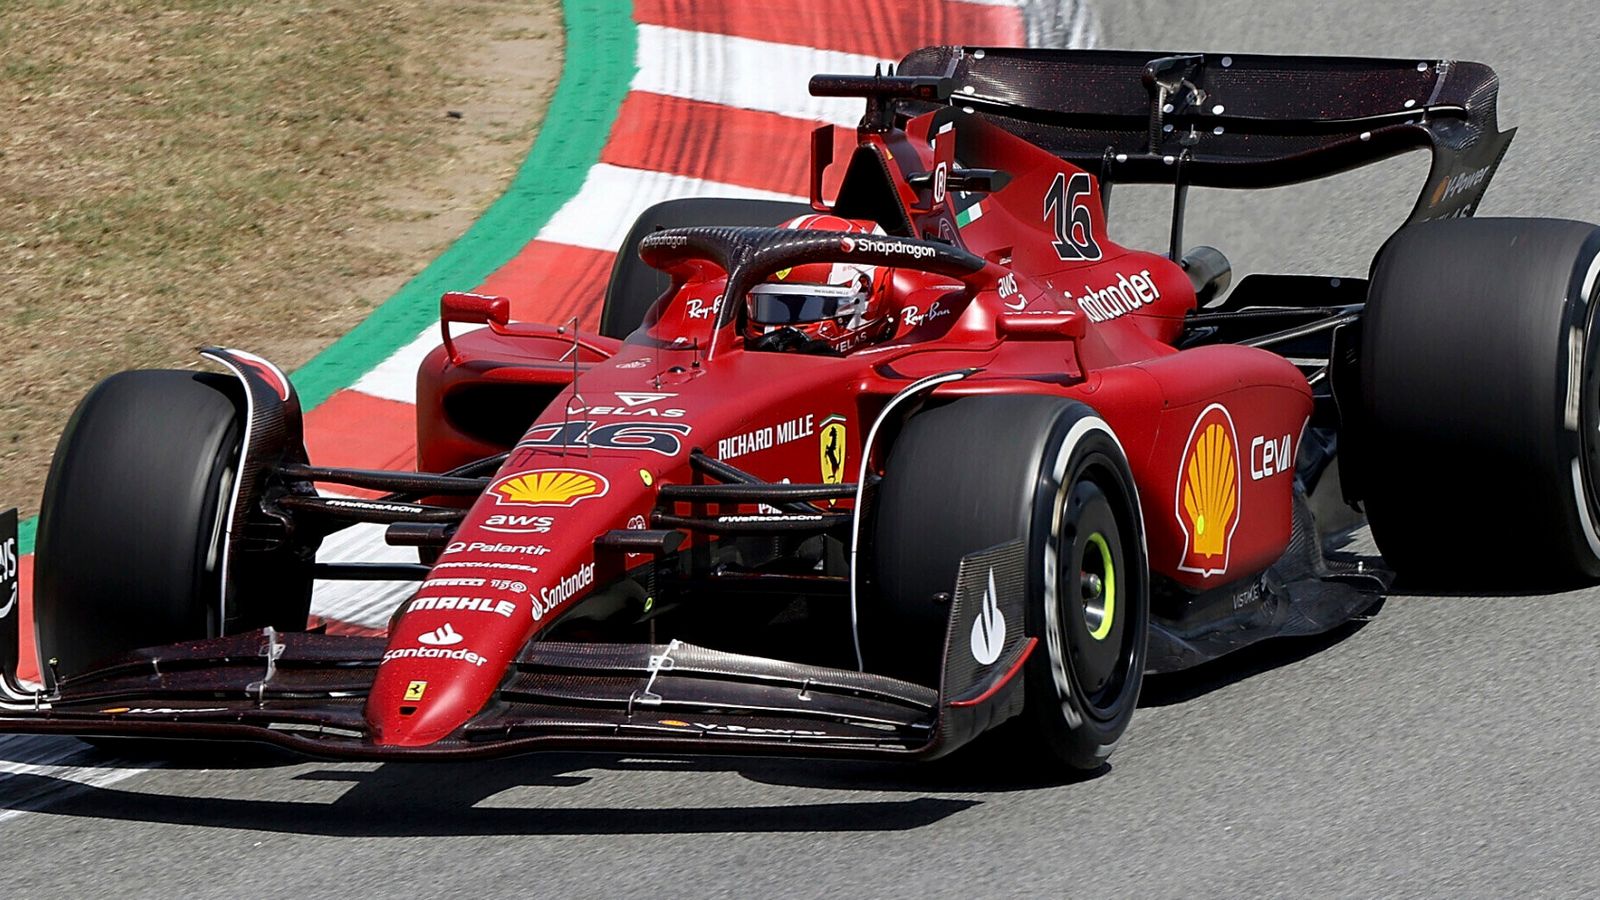 Spanish GP: Charles Leclerc edges George Russell, Lewis Hamilton in Practice Two as Mercedes impress